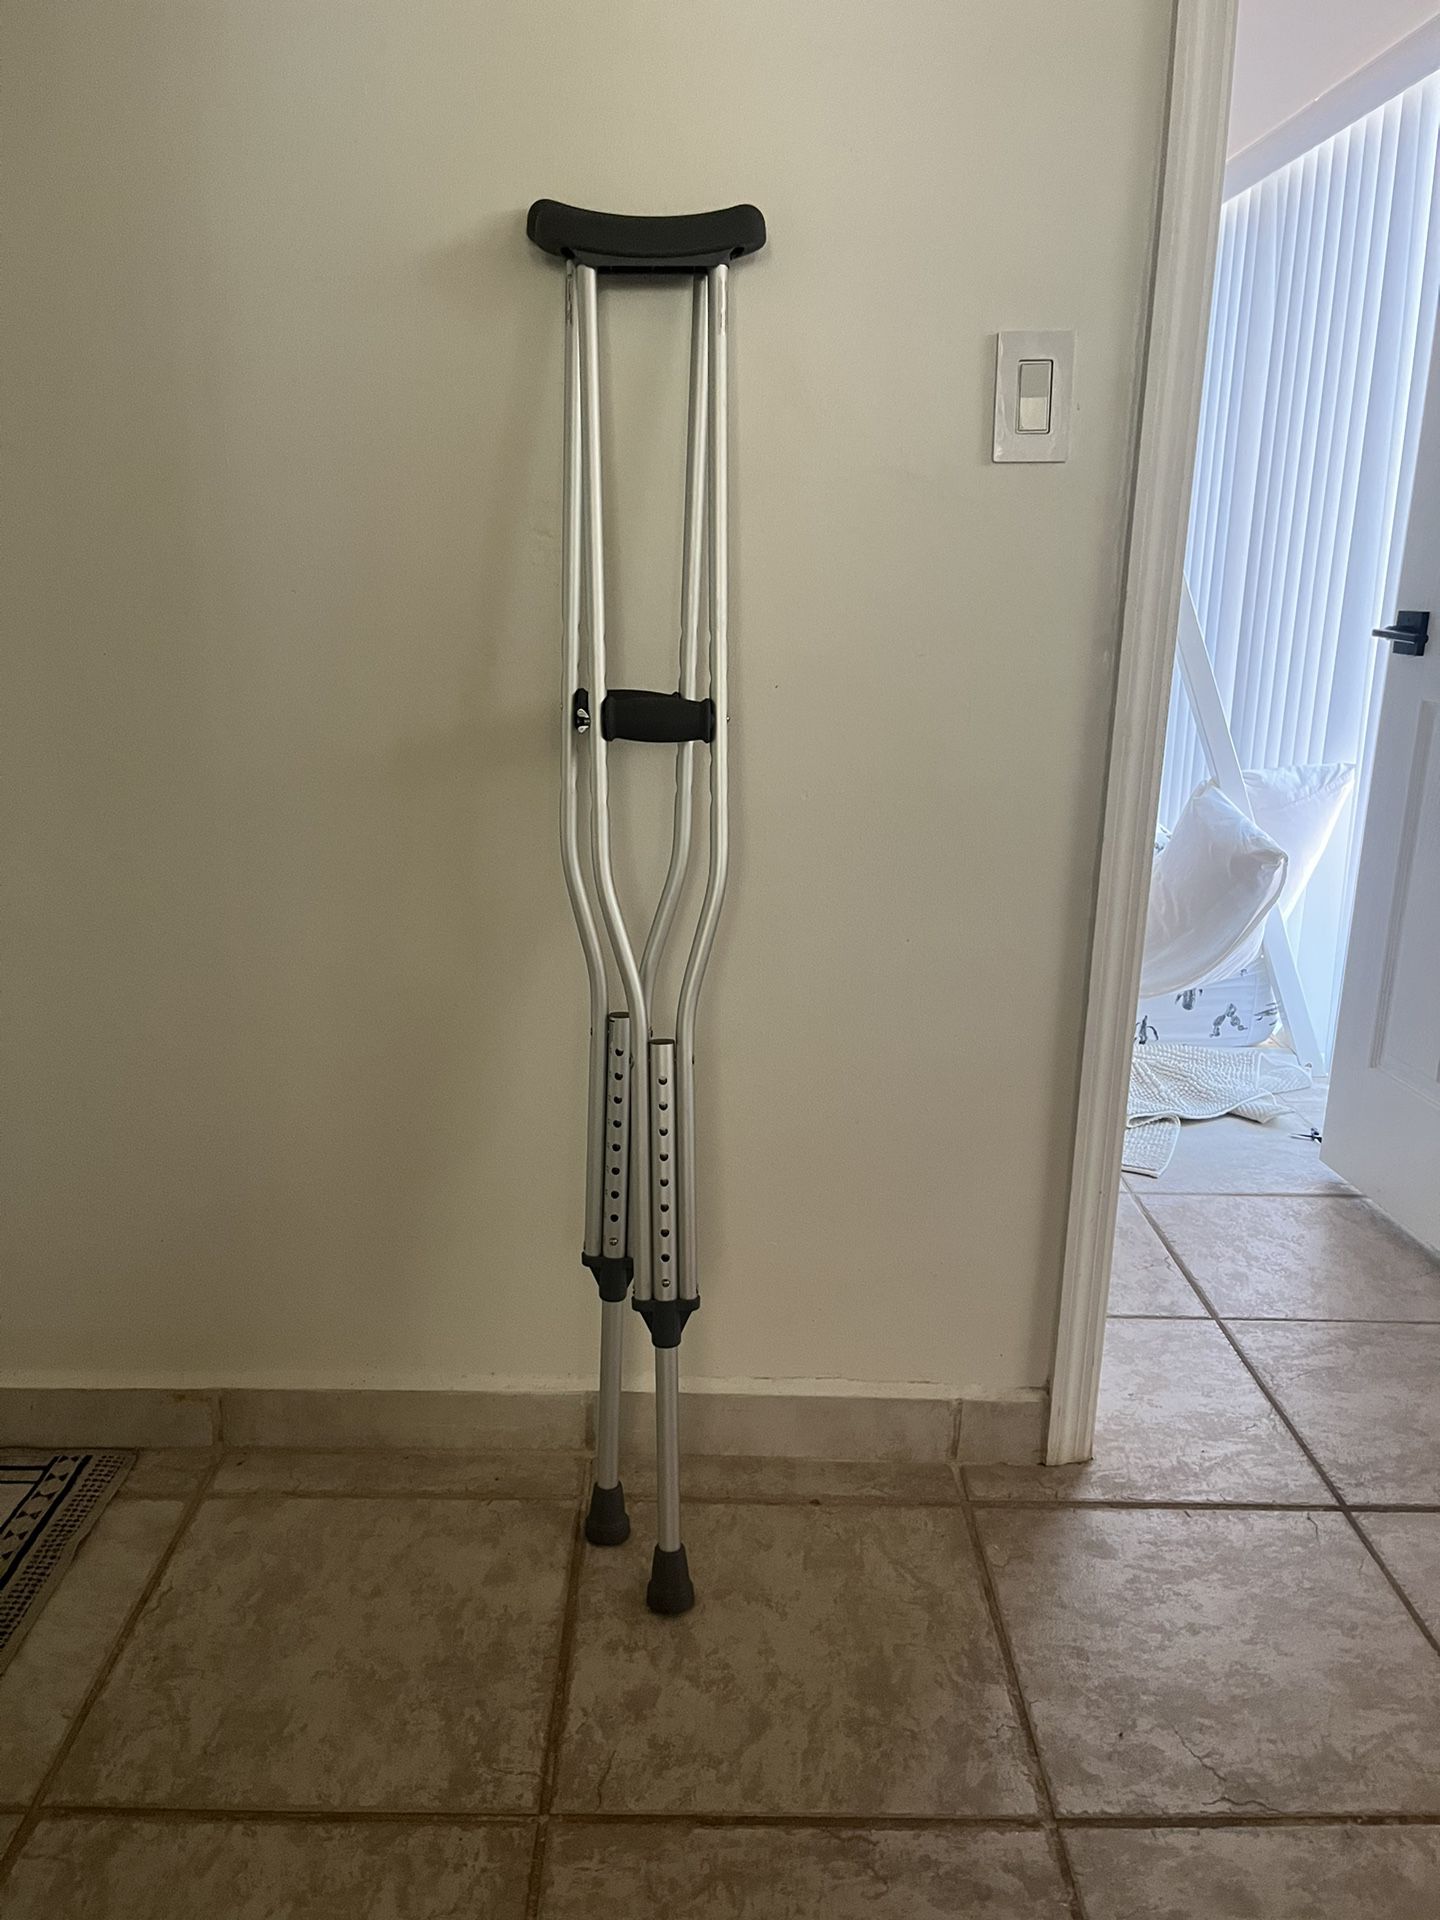 New Crutches for adults (5’2’’-5’10’’)